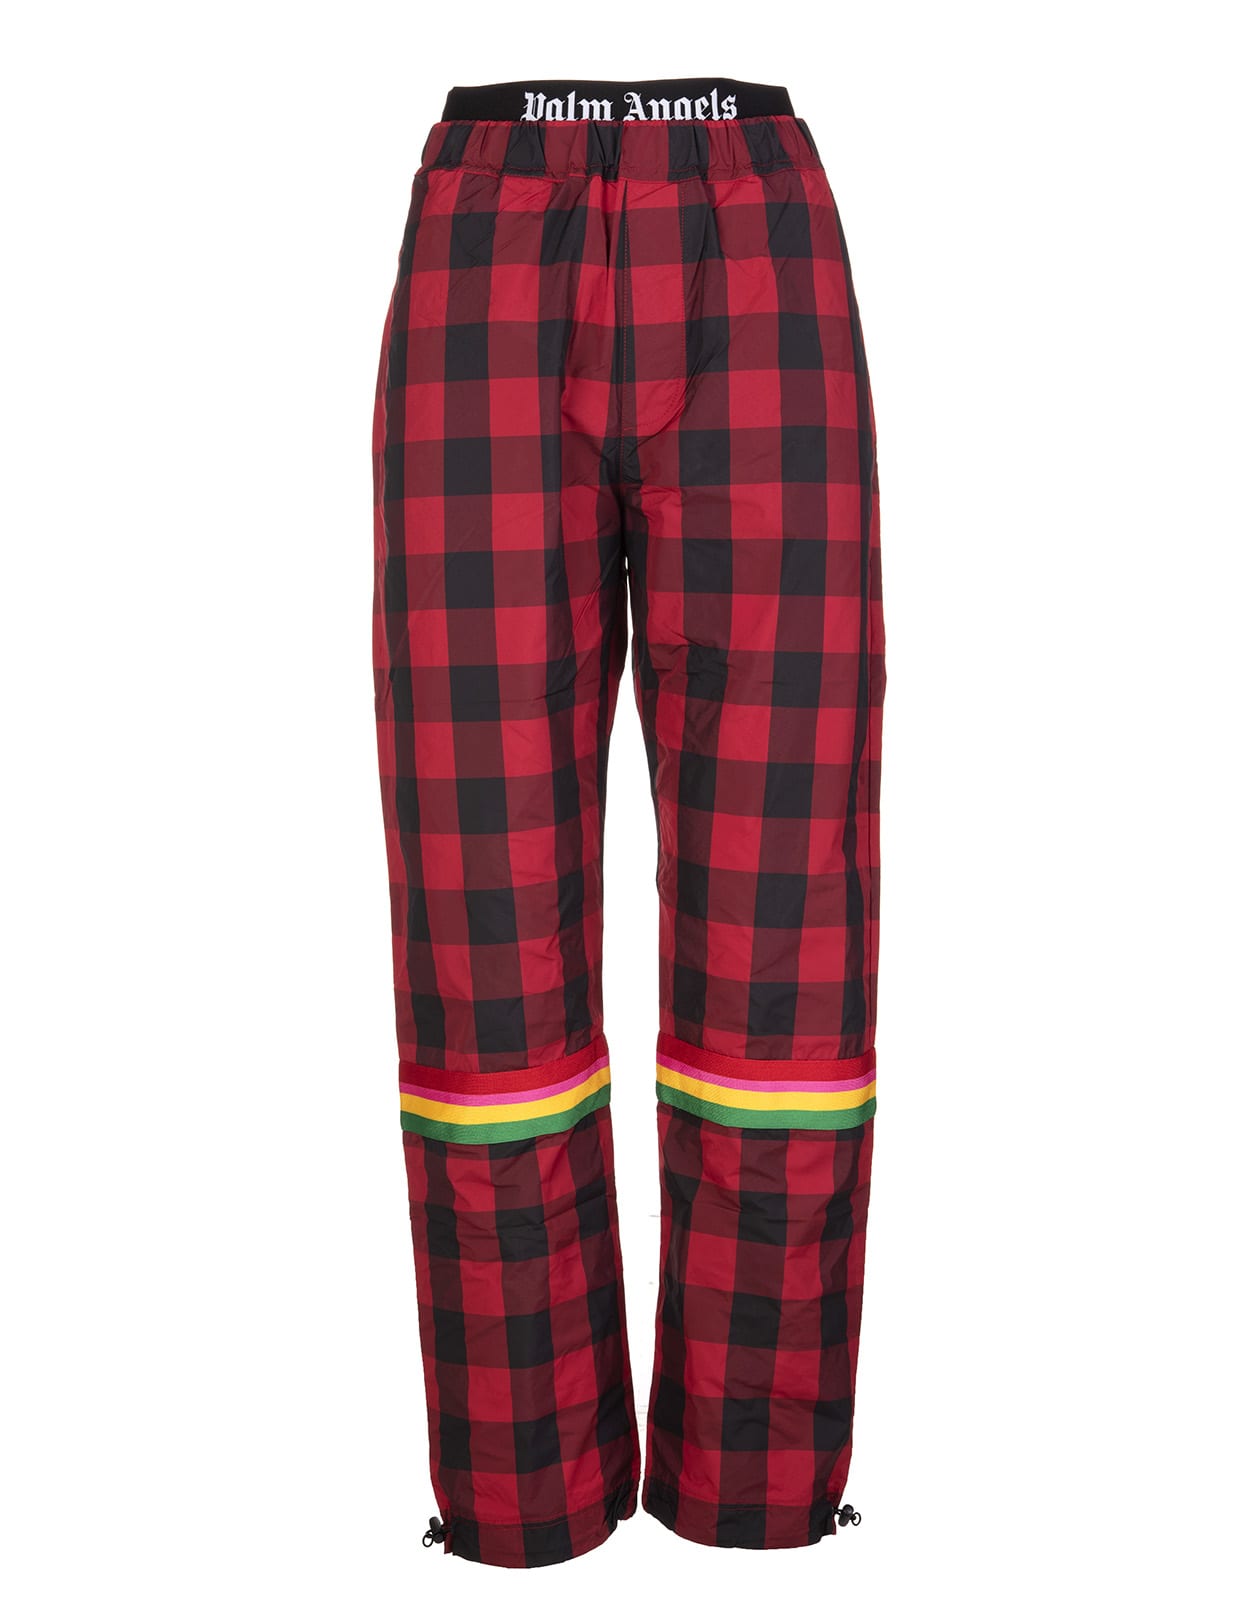 PALM ANGELS WOMAN BLACK AND RED CHECK BUFFALO JOGGERS,PWCA019S21FAB002 2501